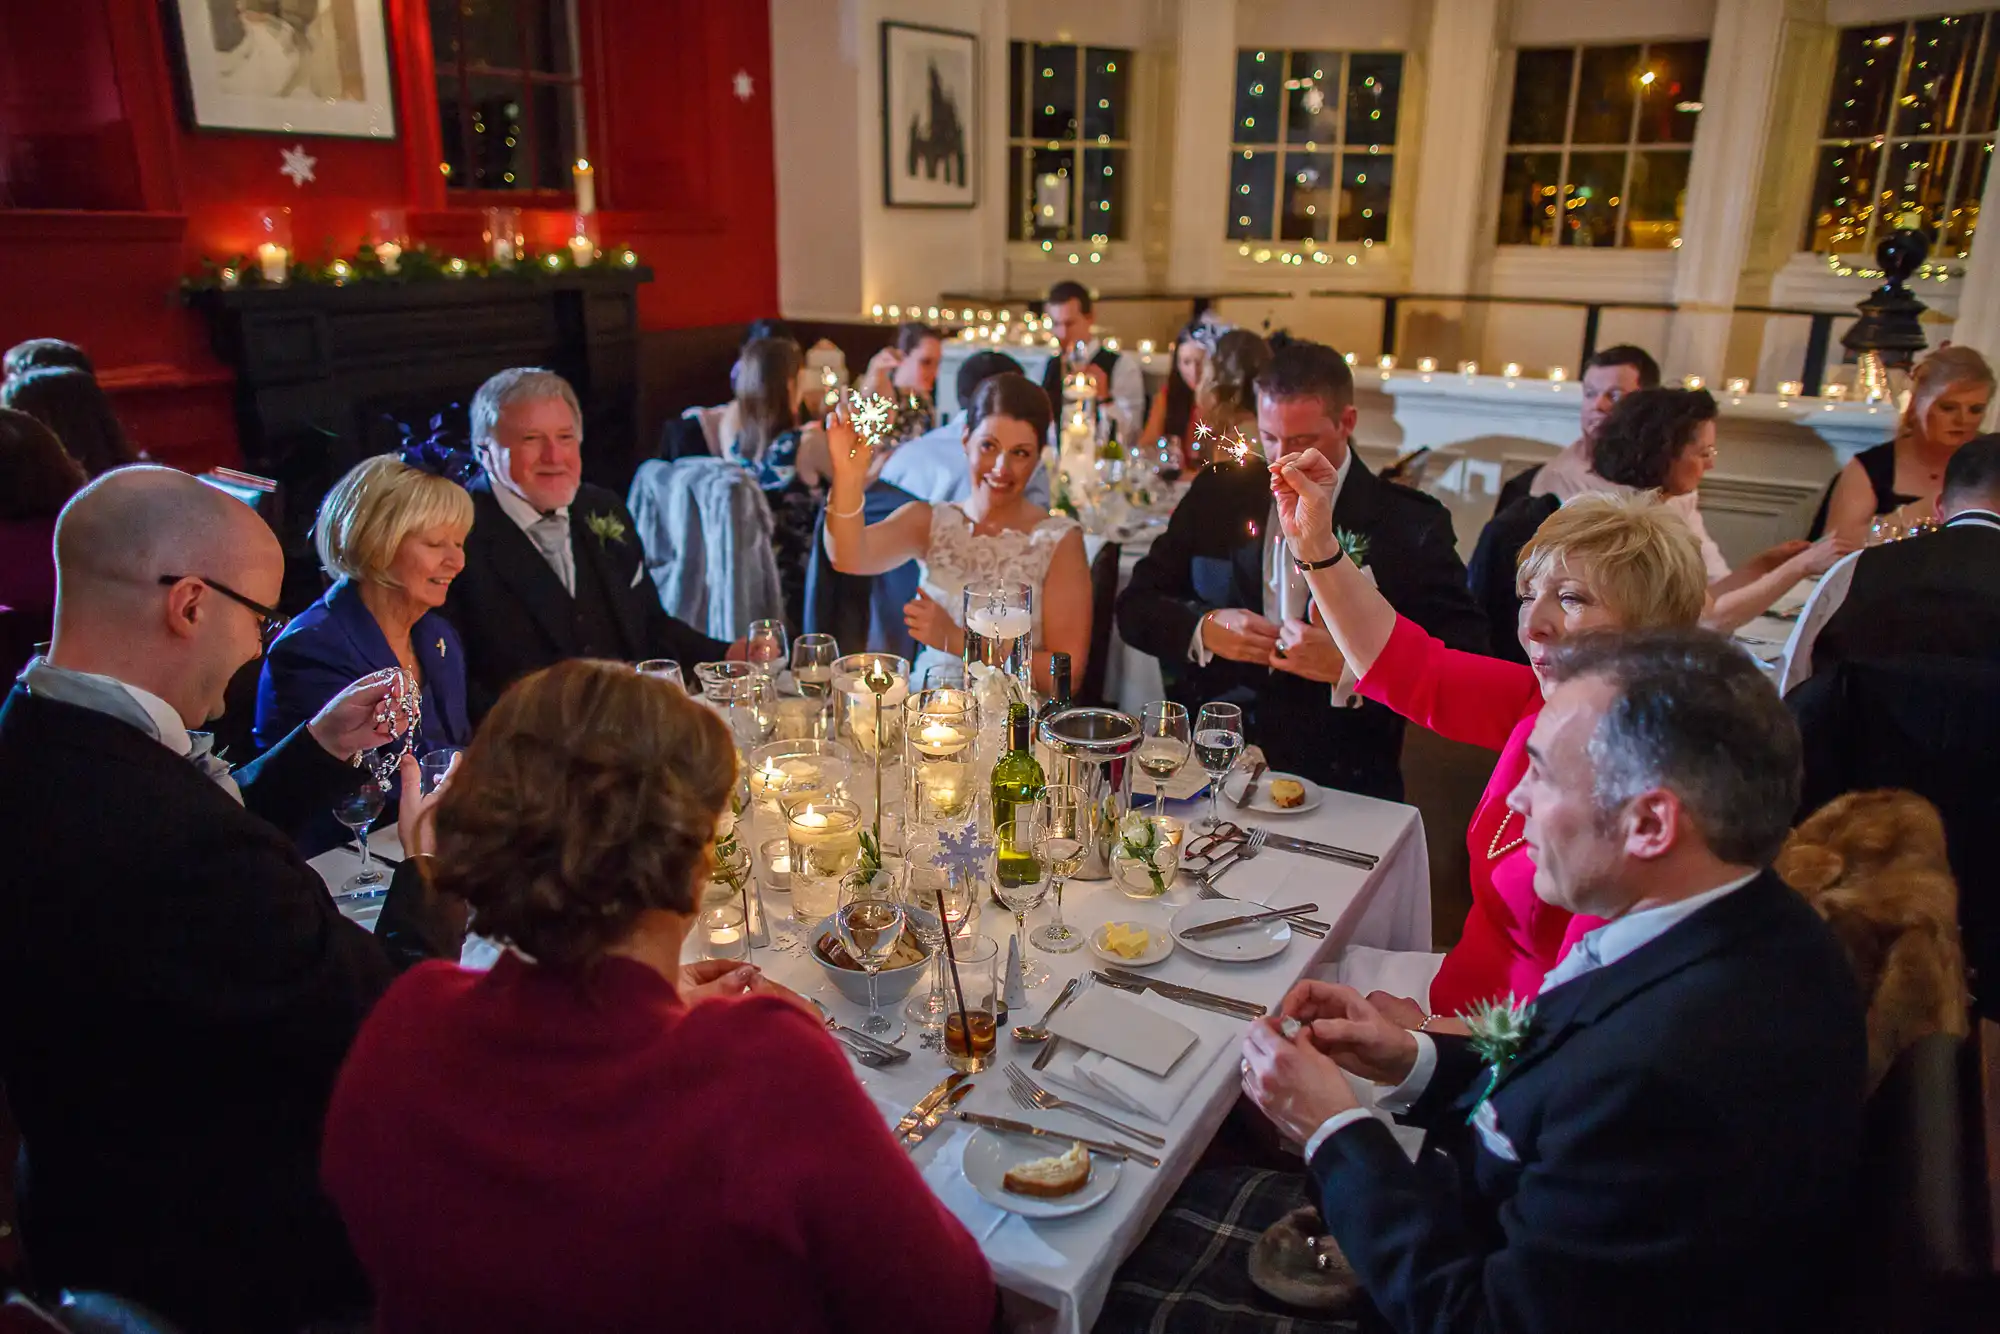 People enjoying a dinner party in a festive, candlelit room, raising glasses in a toast, with holiday decorations visible.